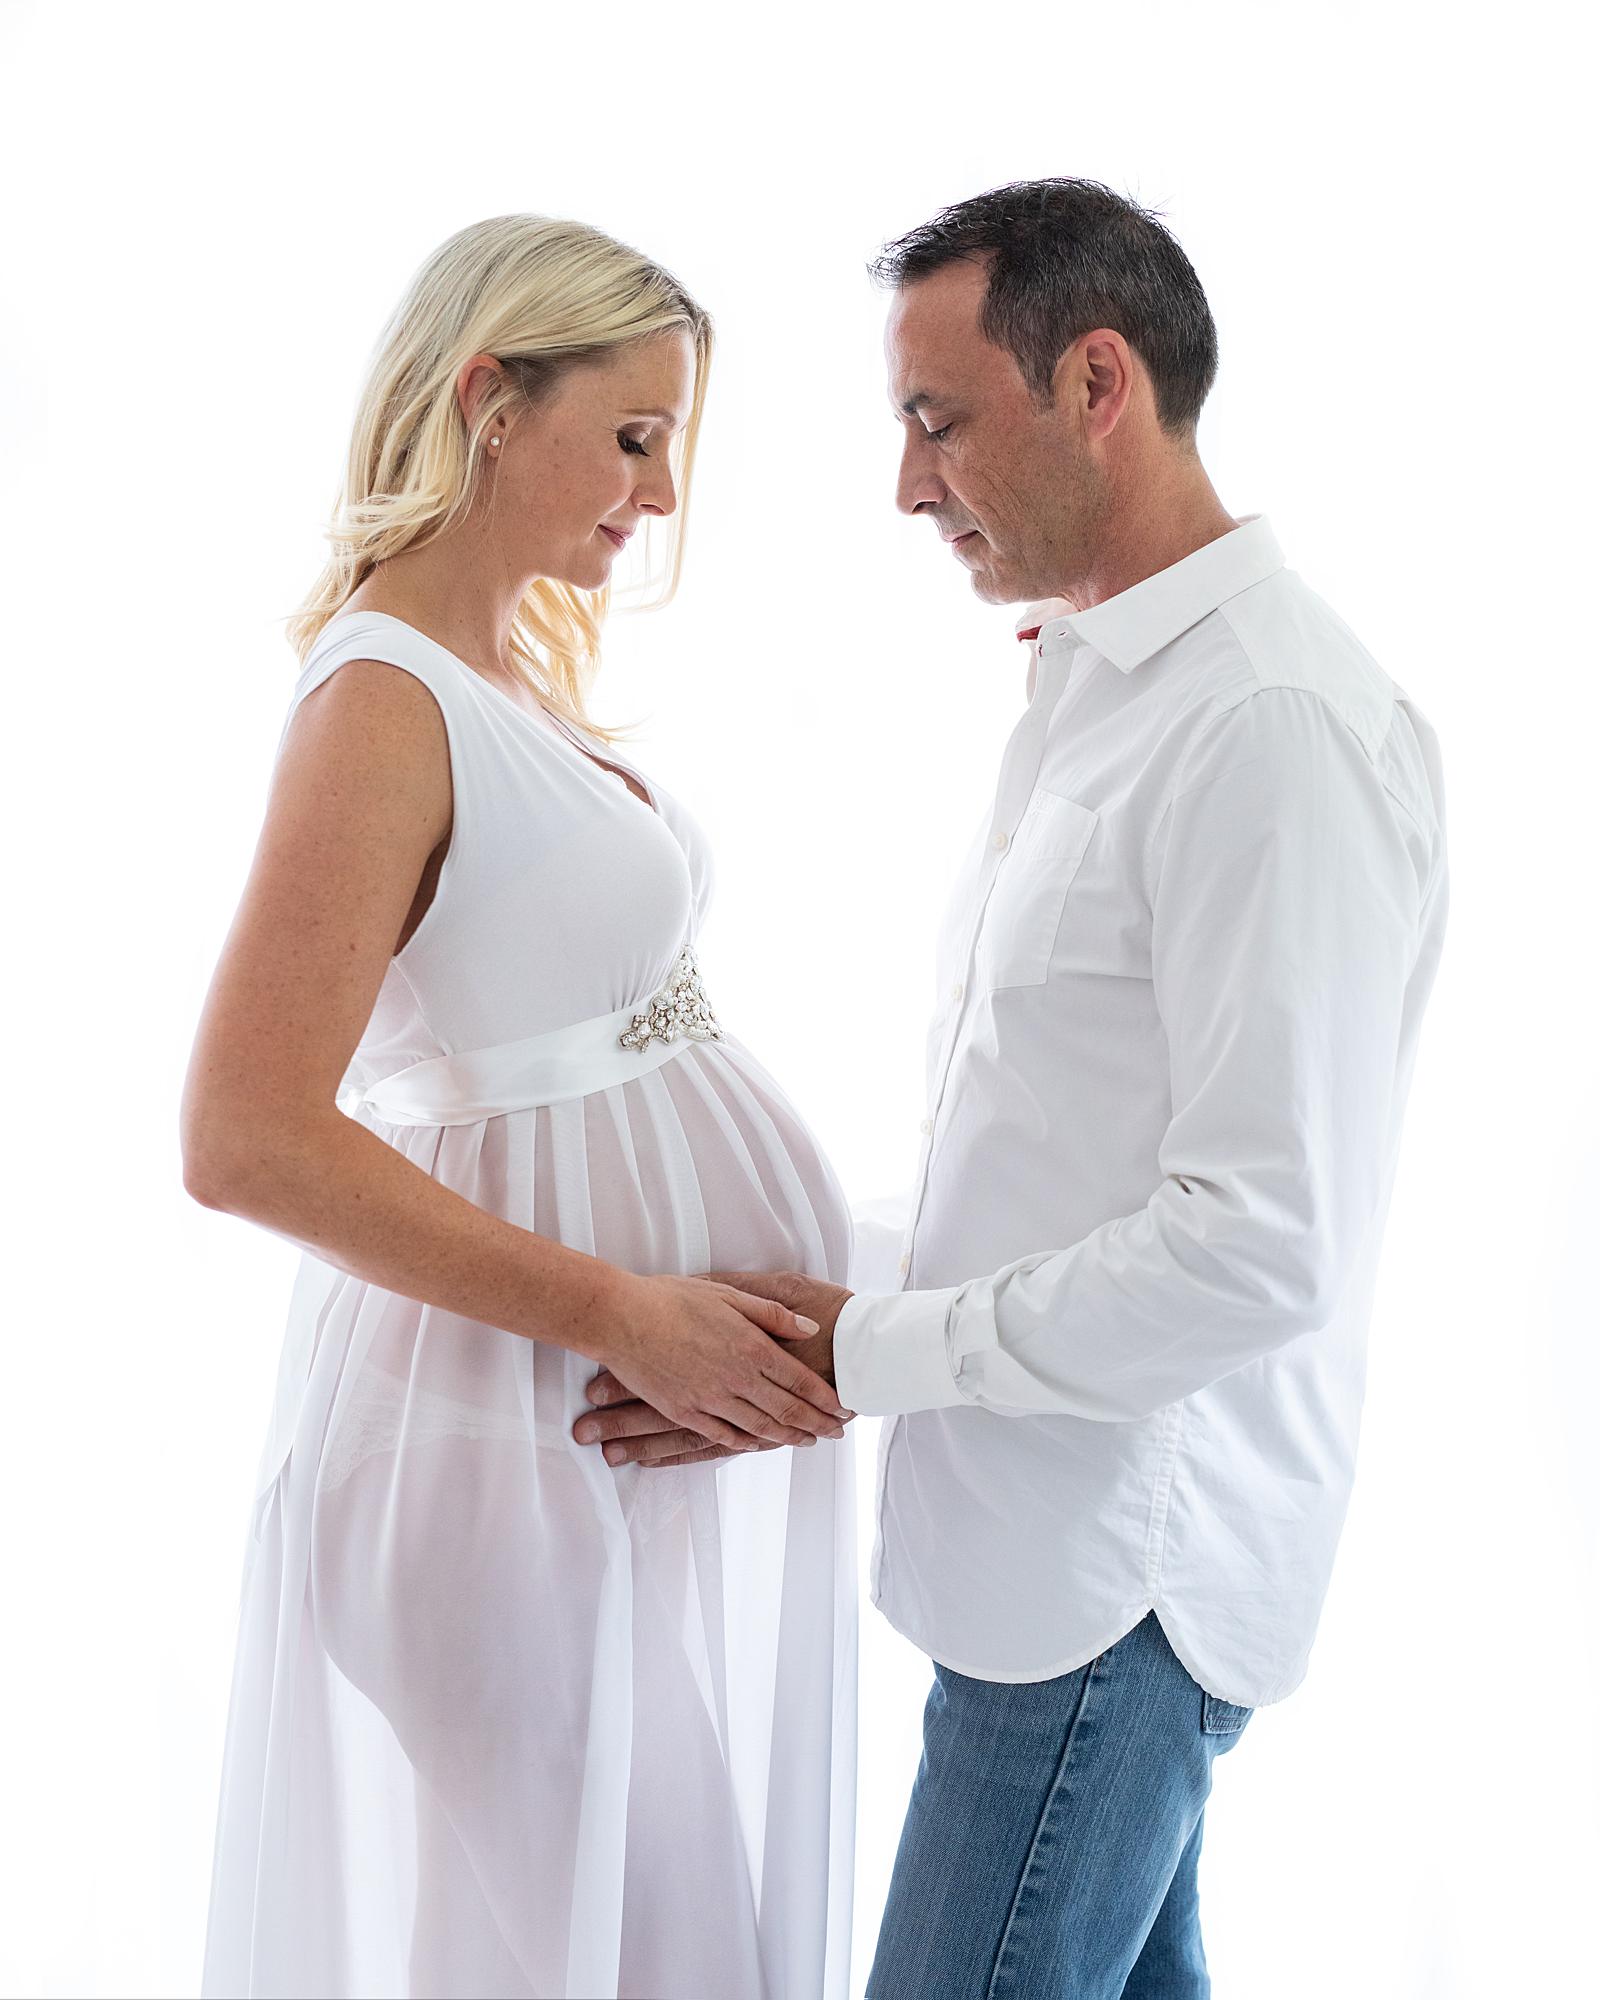 Pregnant woman posing in sheer white dress with her partner touching her belly for a maternity photoshoot in Suffolk